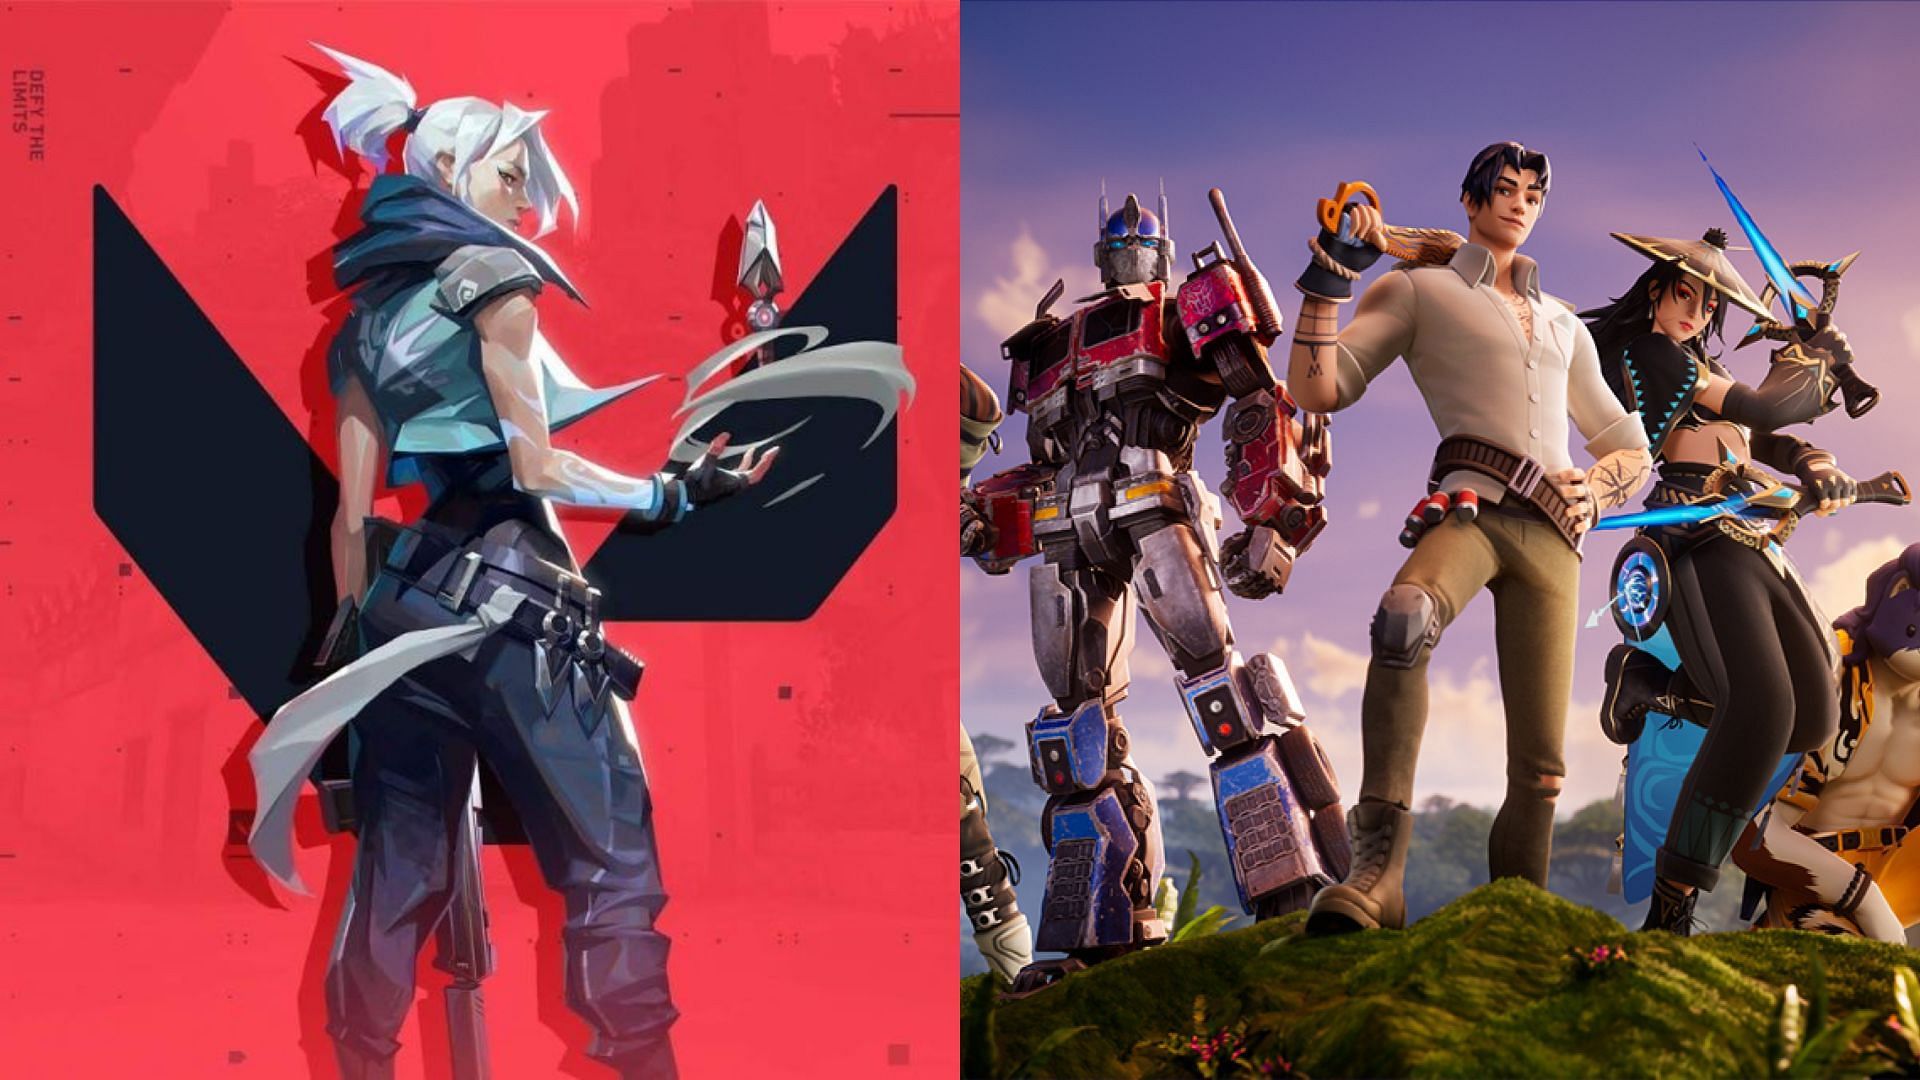 Is a Fortnite x Valorant crossover happening? (Image via Epic Games/Riot Games)